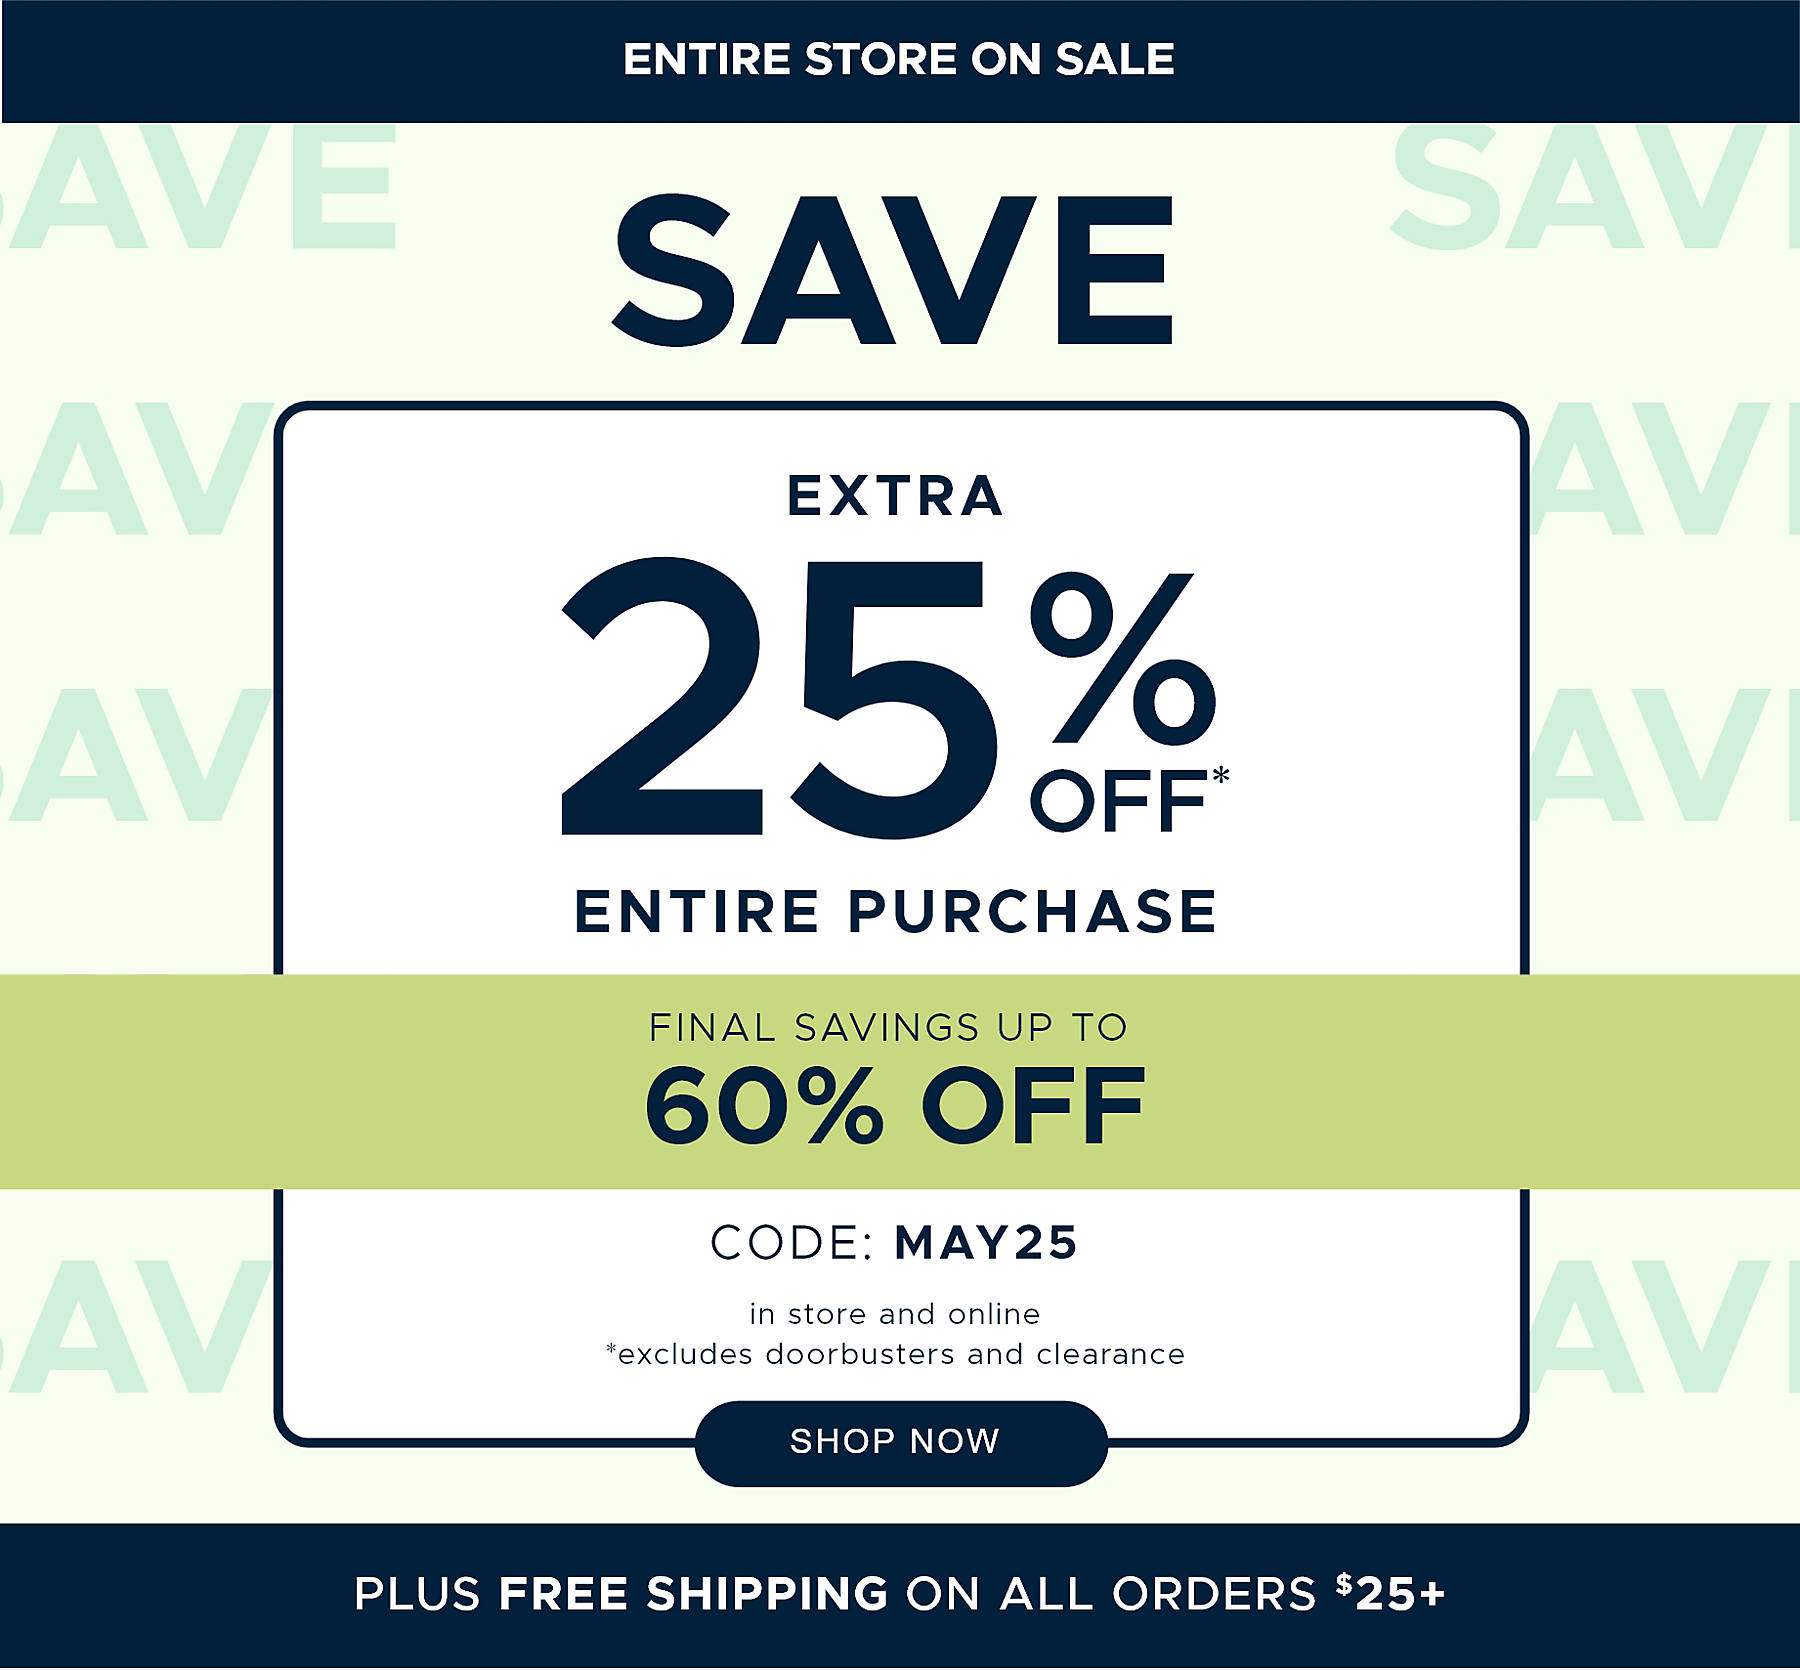 Entire Store on Sale Save extra 25% off* Entire Purchase Final Savings Up to 60% off code: MAY25 in store and online *excludes doorbusters and clearance Plus Free Shipping on All Orders $25+